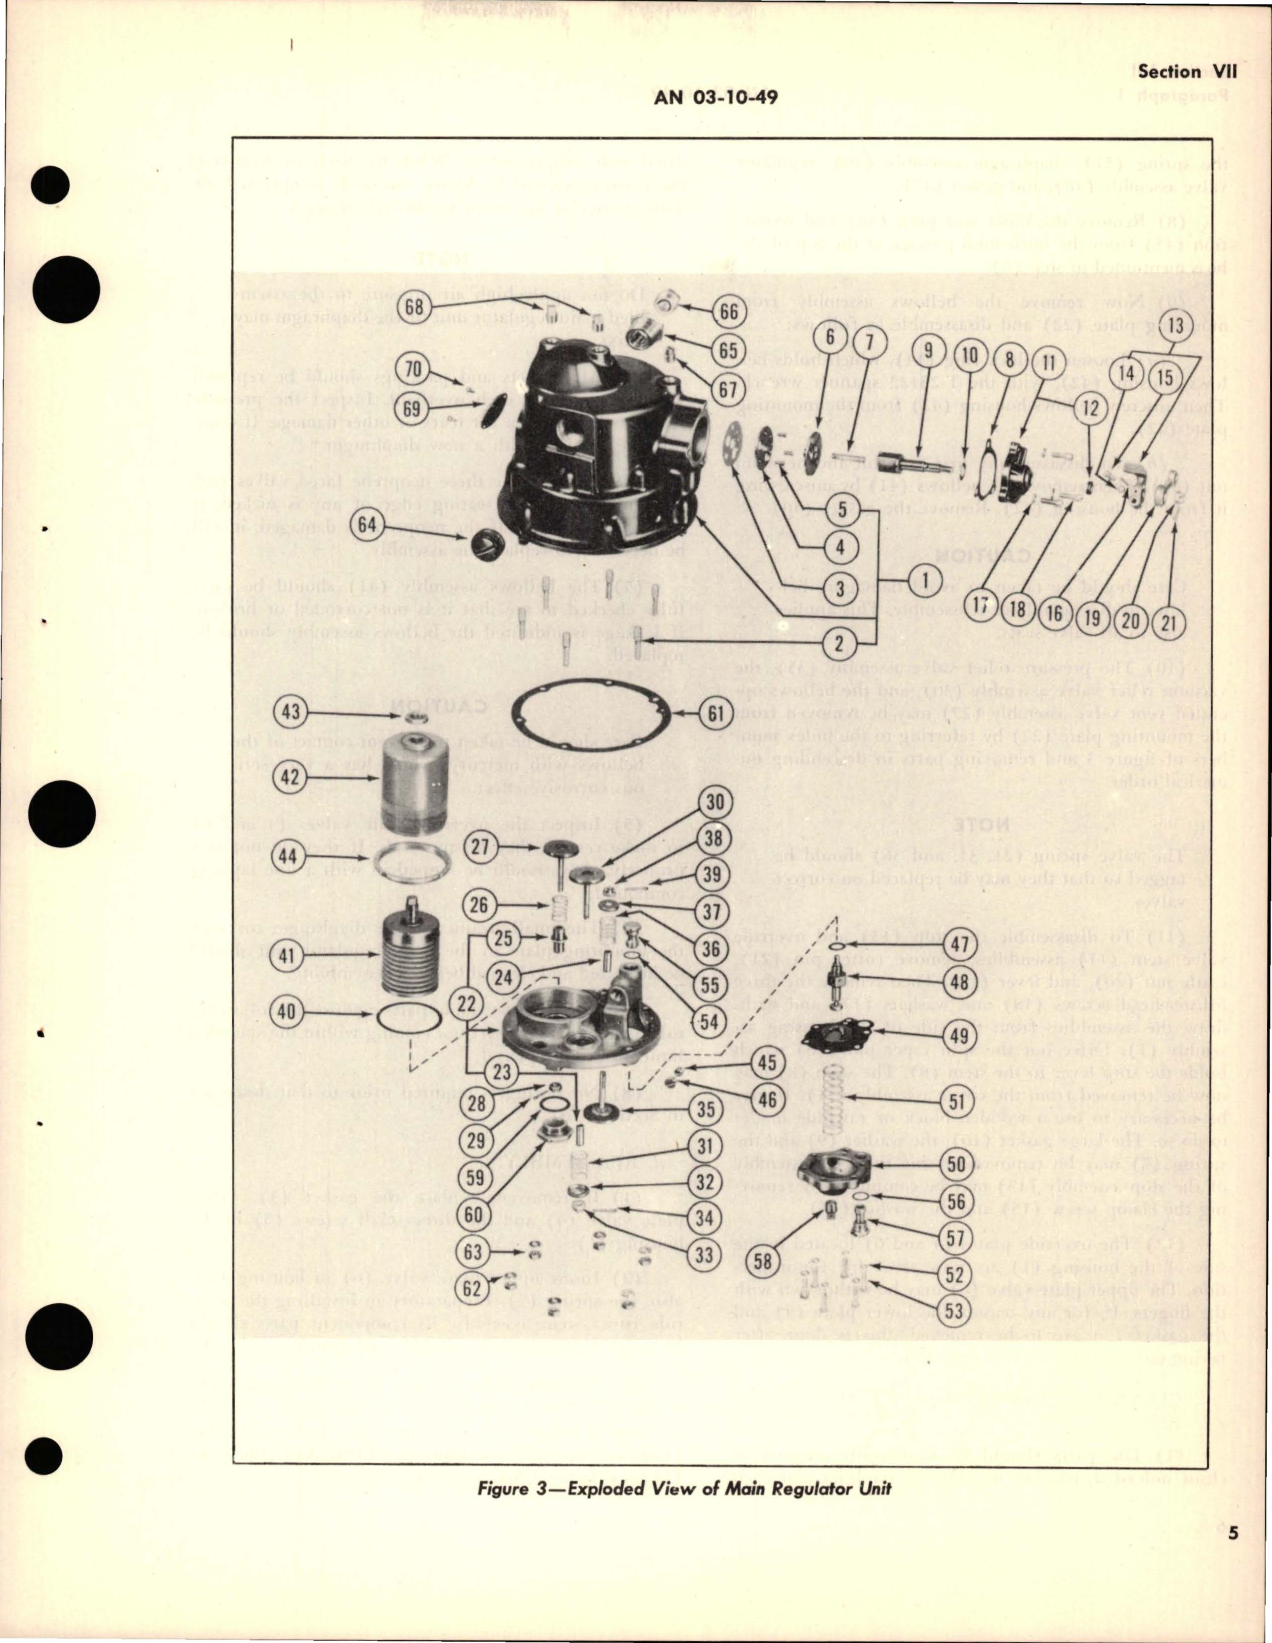 Sample page 9 from AirCorps Library document: Instructions with Parts Catalog for Fuel Tank Pressure Control